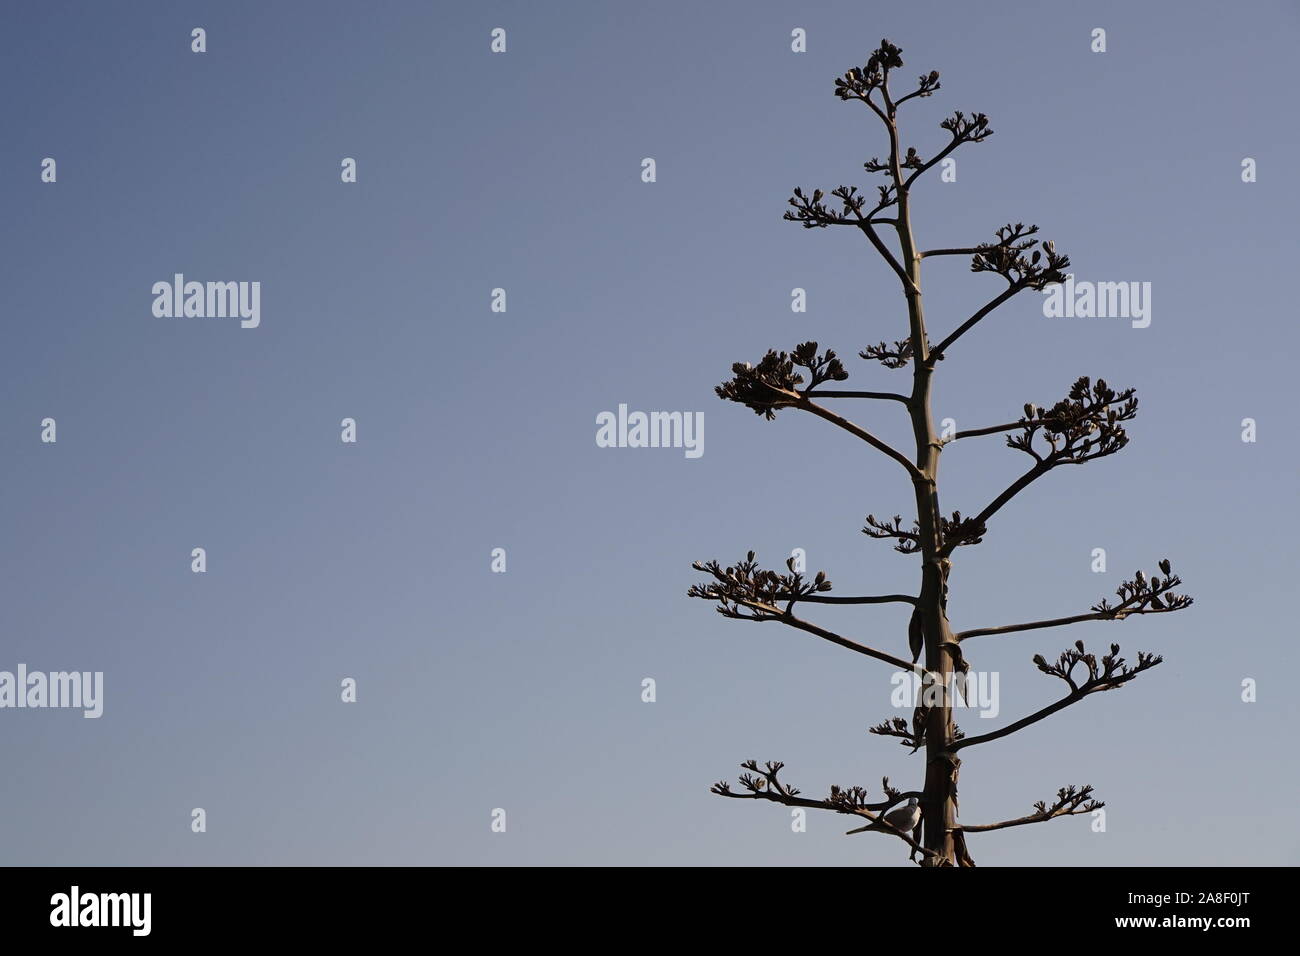 A tree in arid climate against a clear blue summer sky Stock Photo